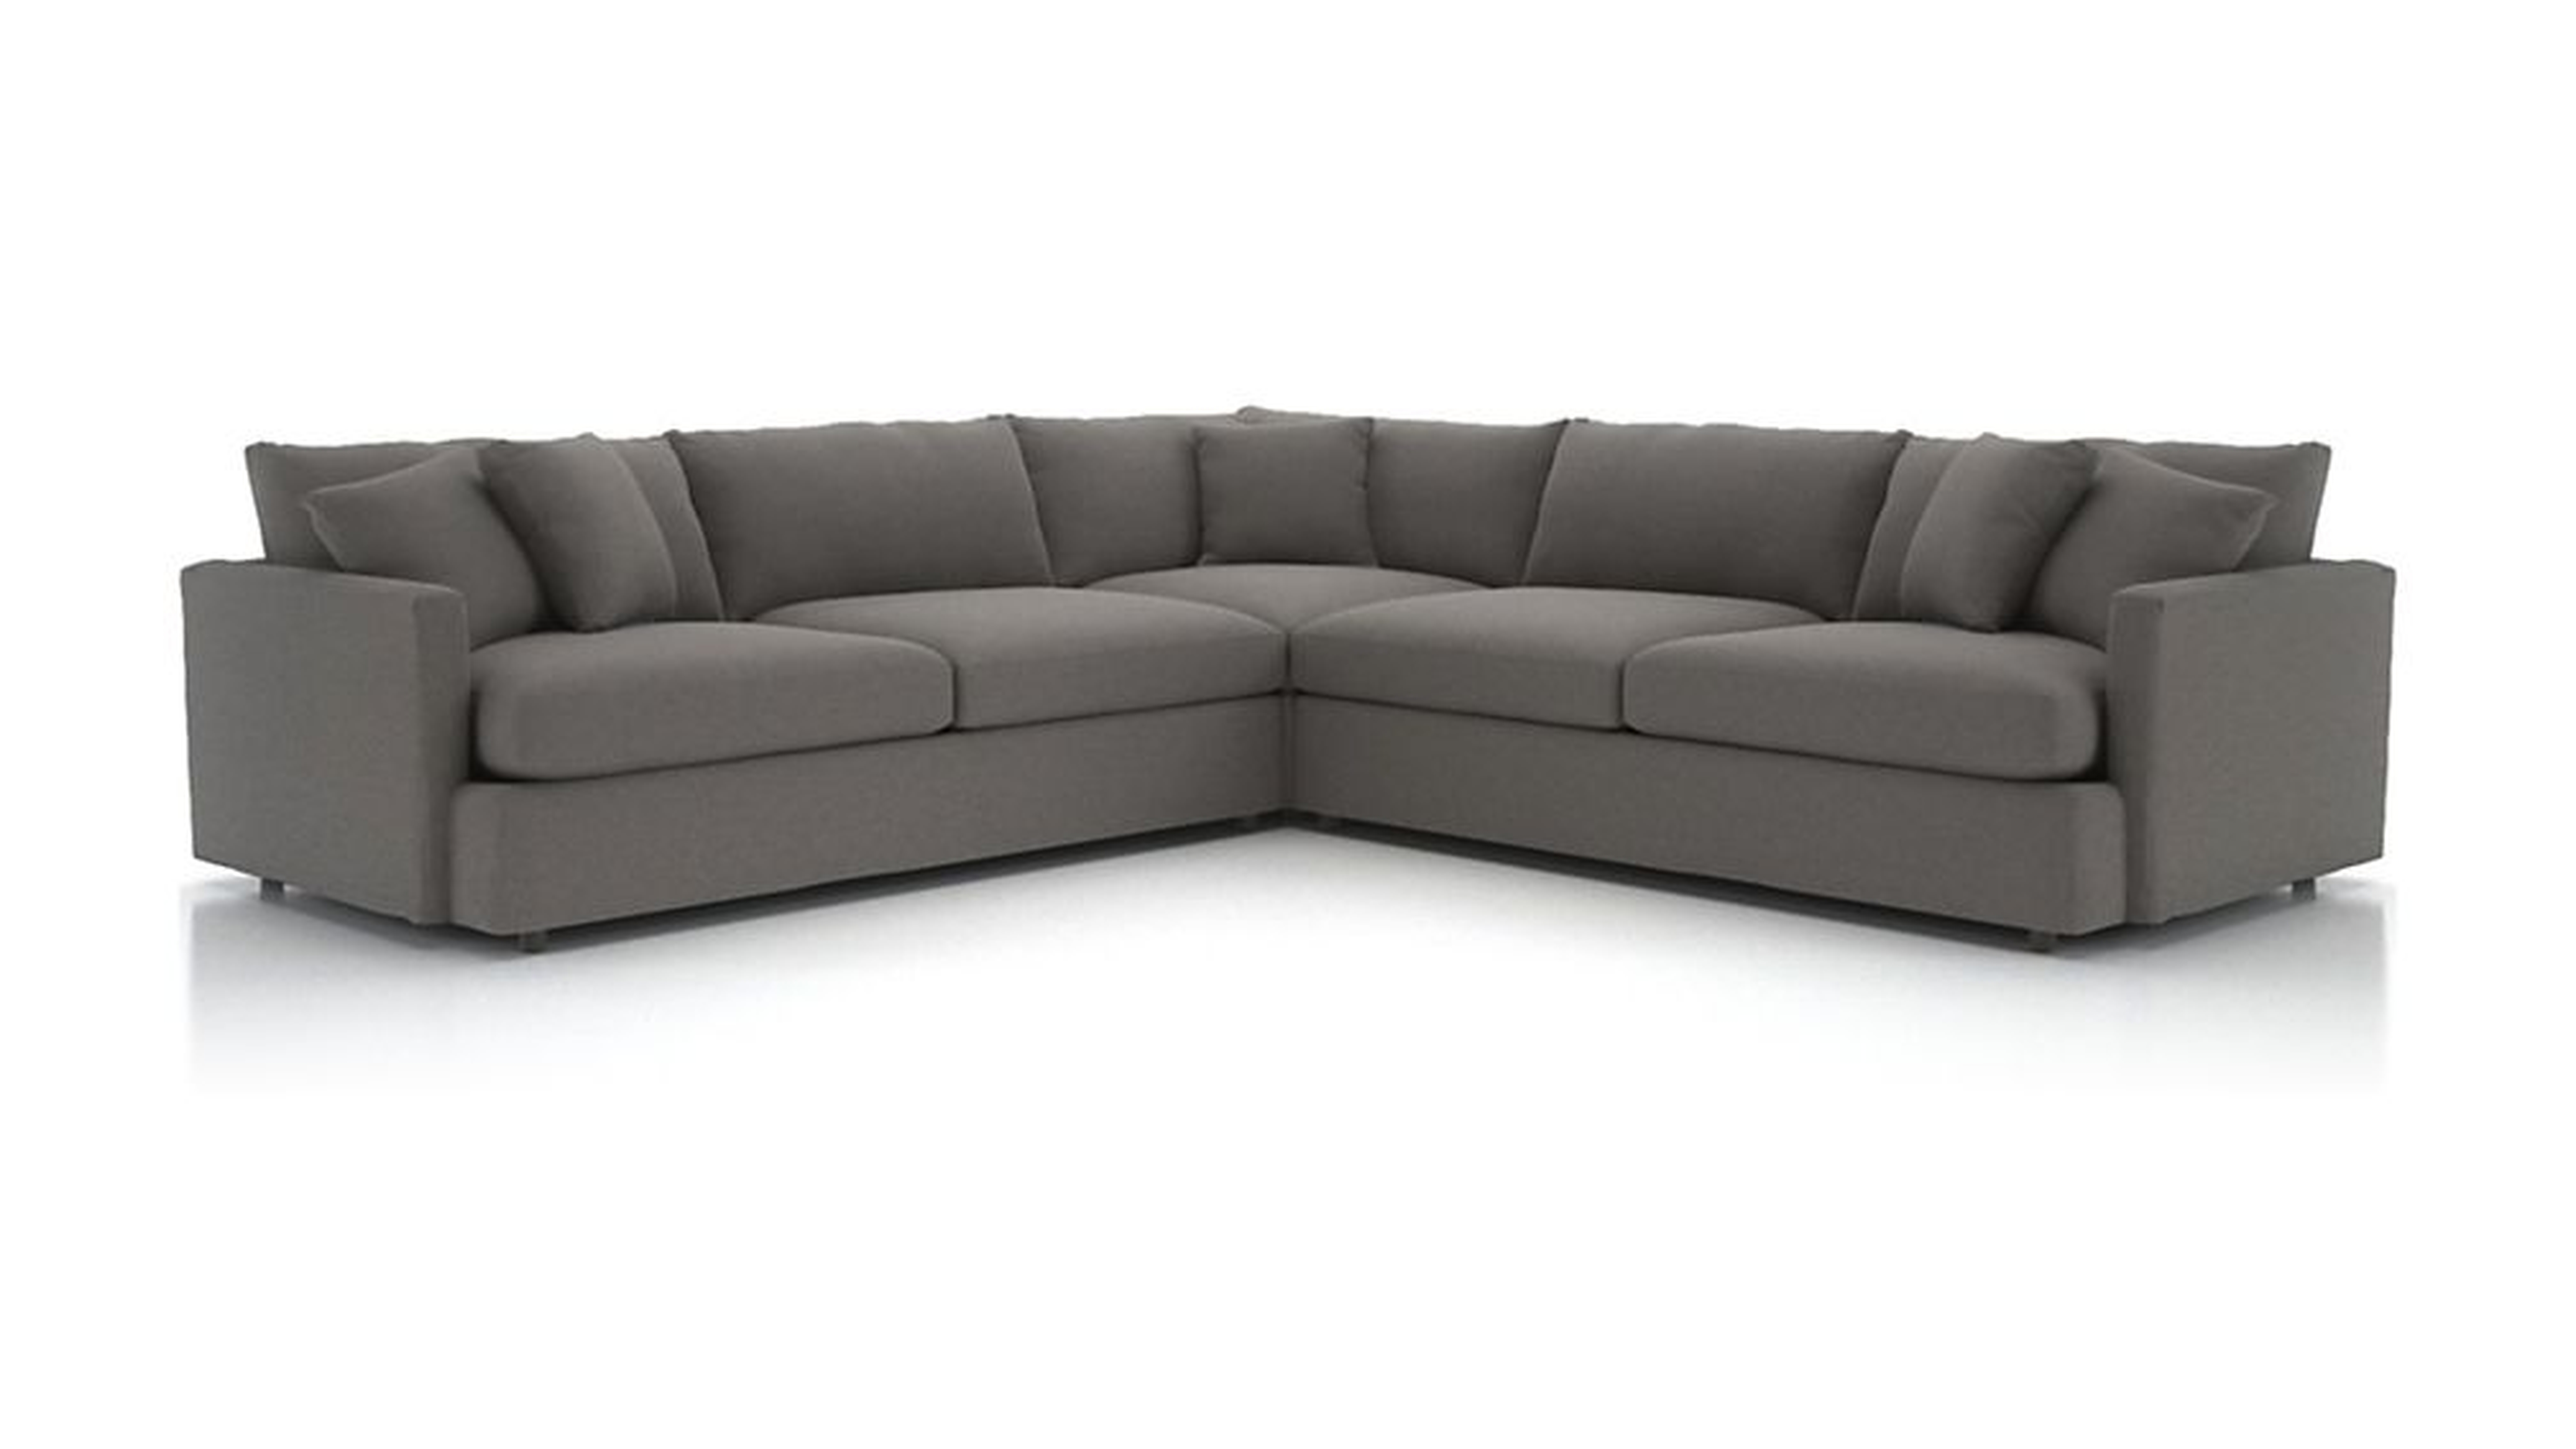 Lounge II 3-Piece Sectional Sofa - Crate and Barrel